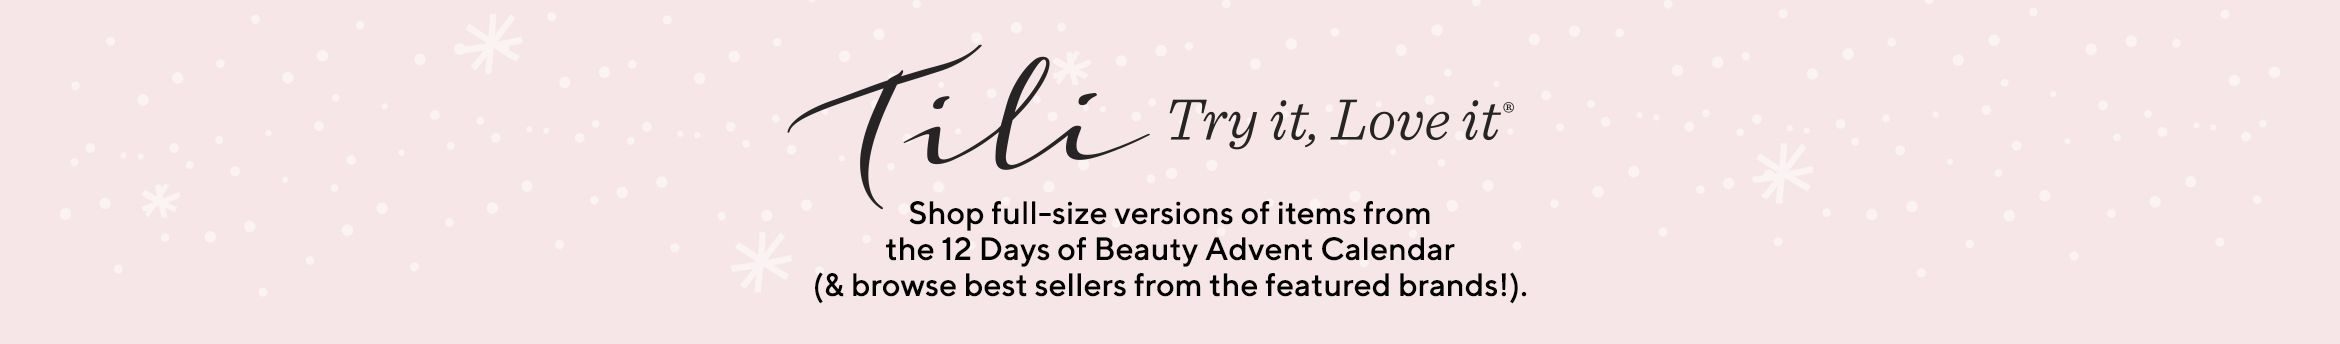 TILI Try it, Love it®  Shop full-size versions of items from the 12 Days of Beauty Advent Calendar (& browse best sellers from the featured brands!).